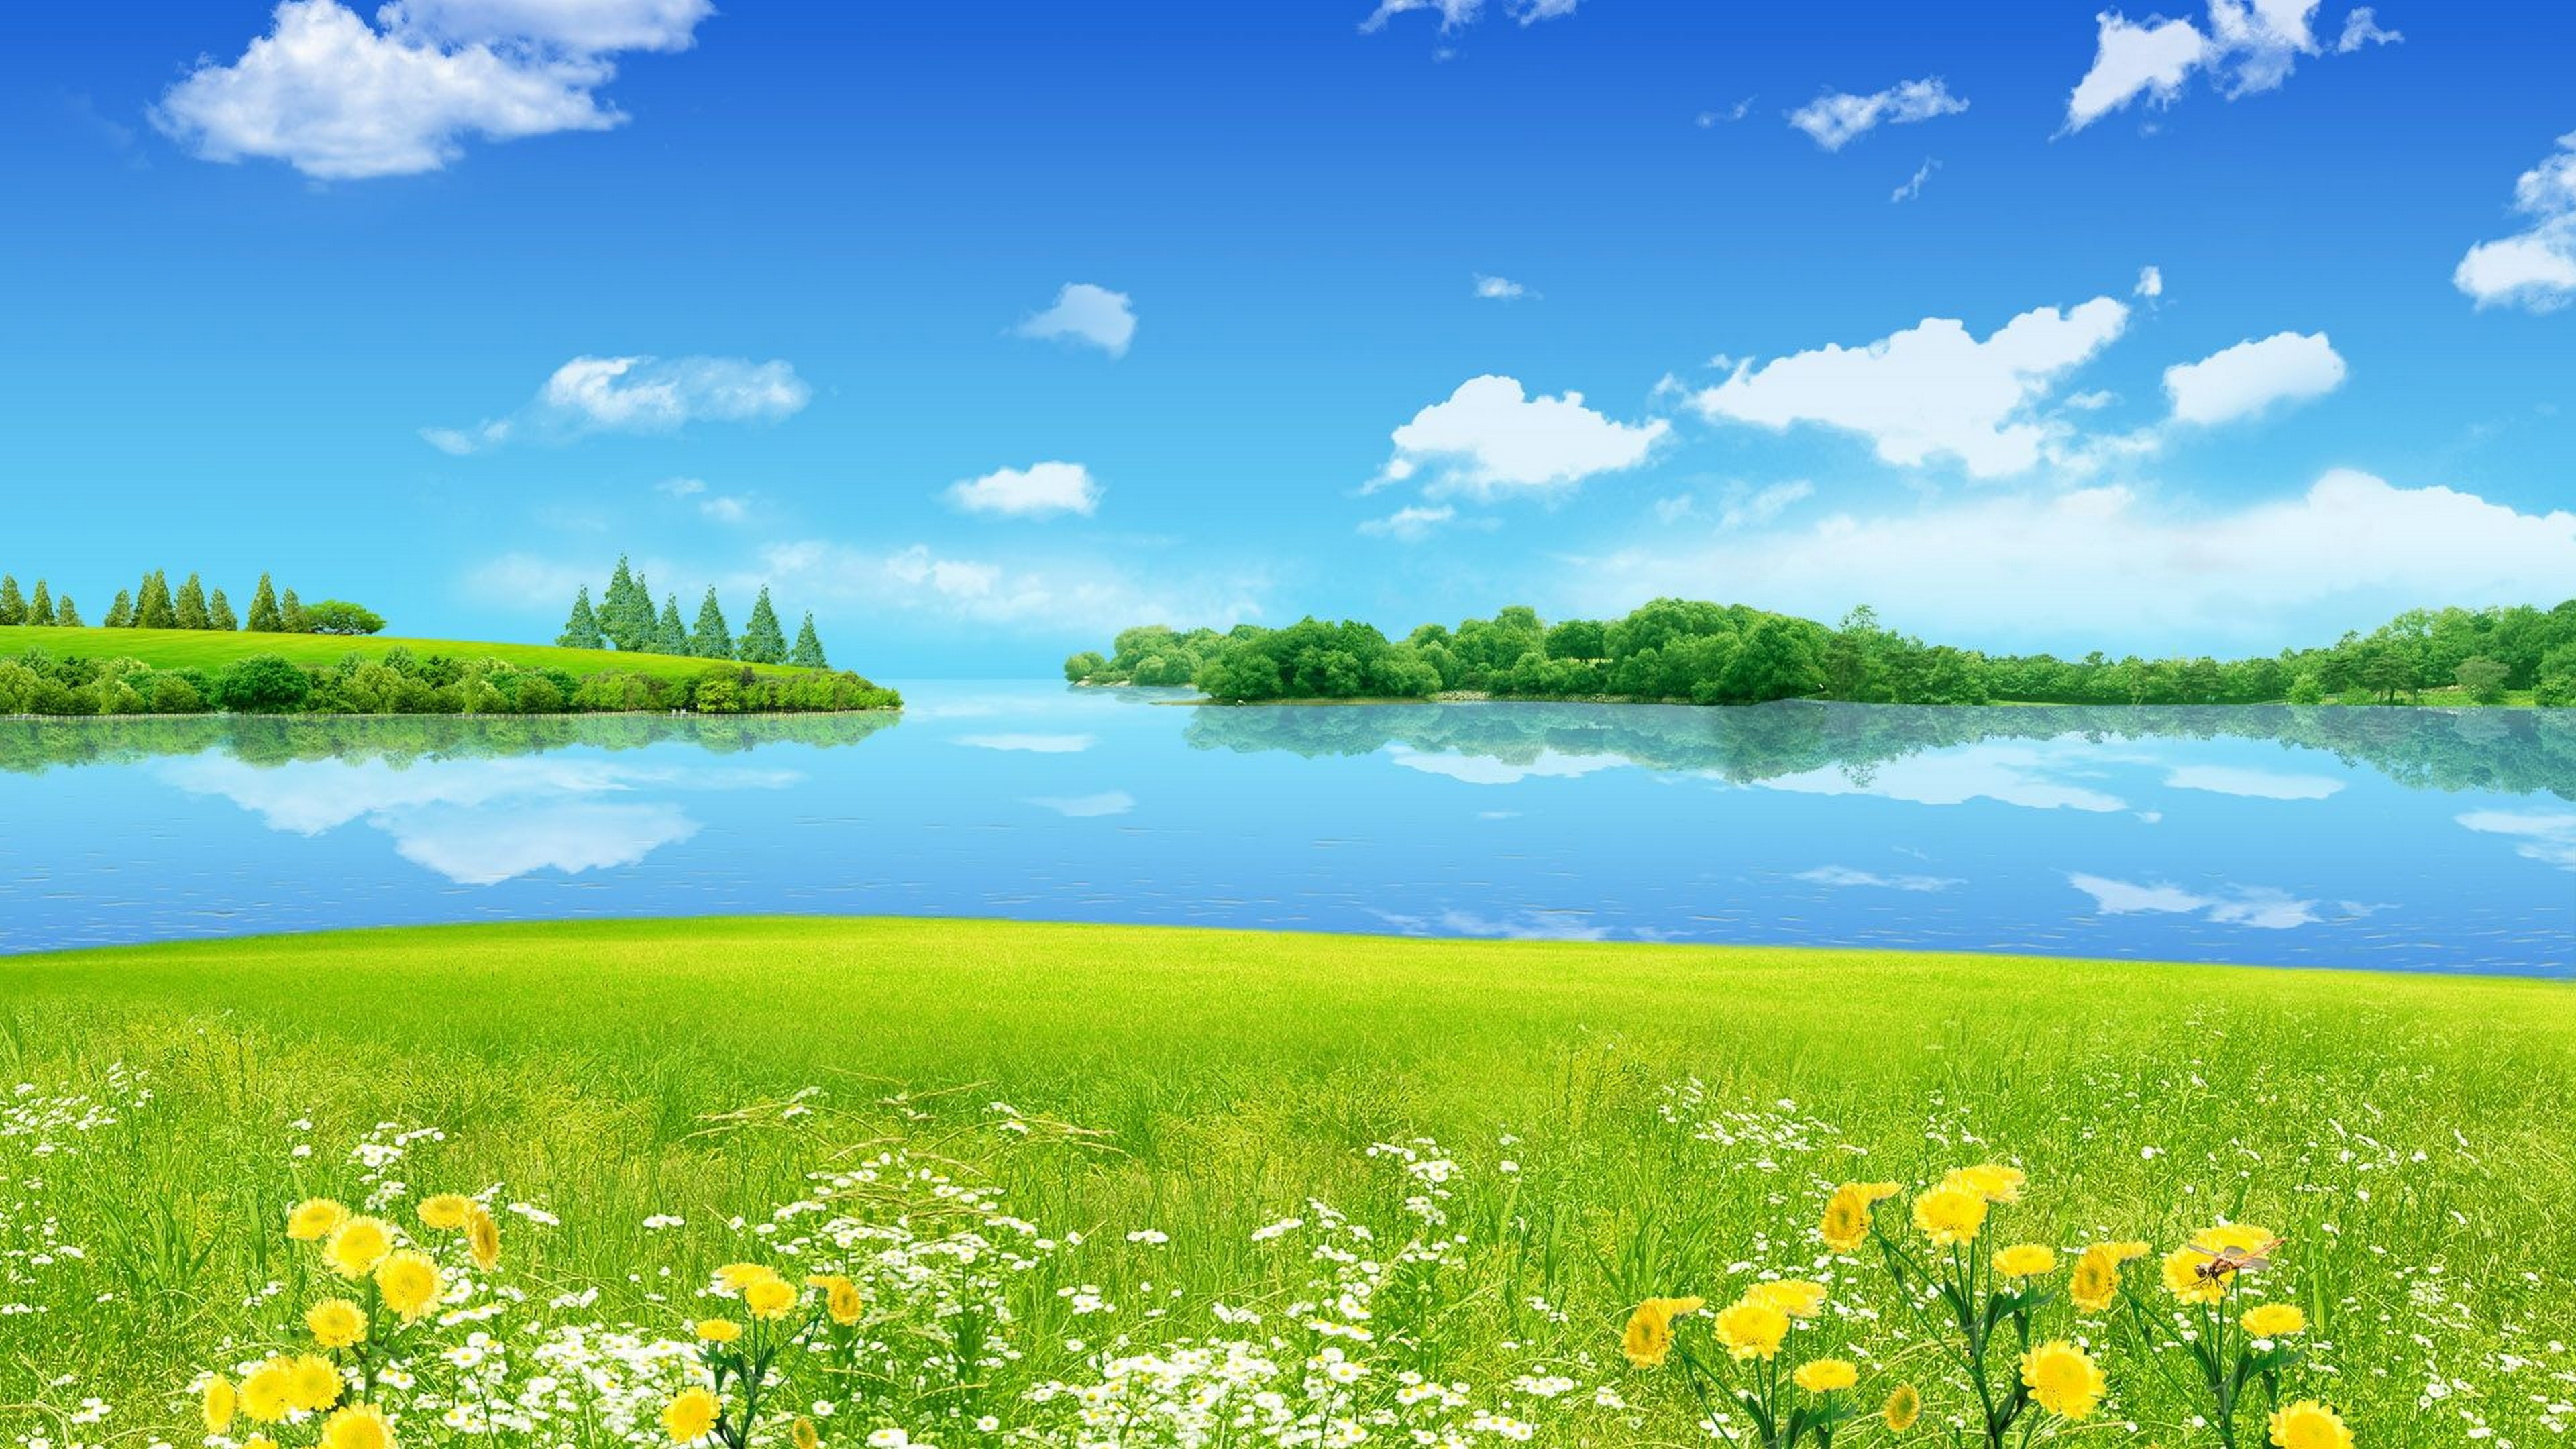 Summer Landscape Meadow With Green Grass Wild Flowers Blue Sky Reflection  In Lake Desktop Hd Wallpaper For Mobile Phones Tablet And Pc :  